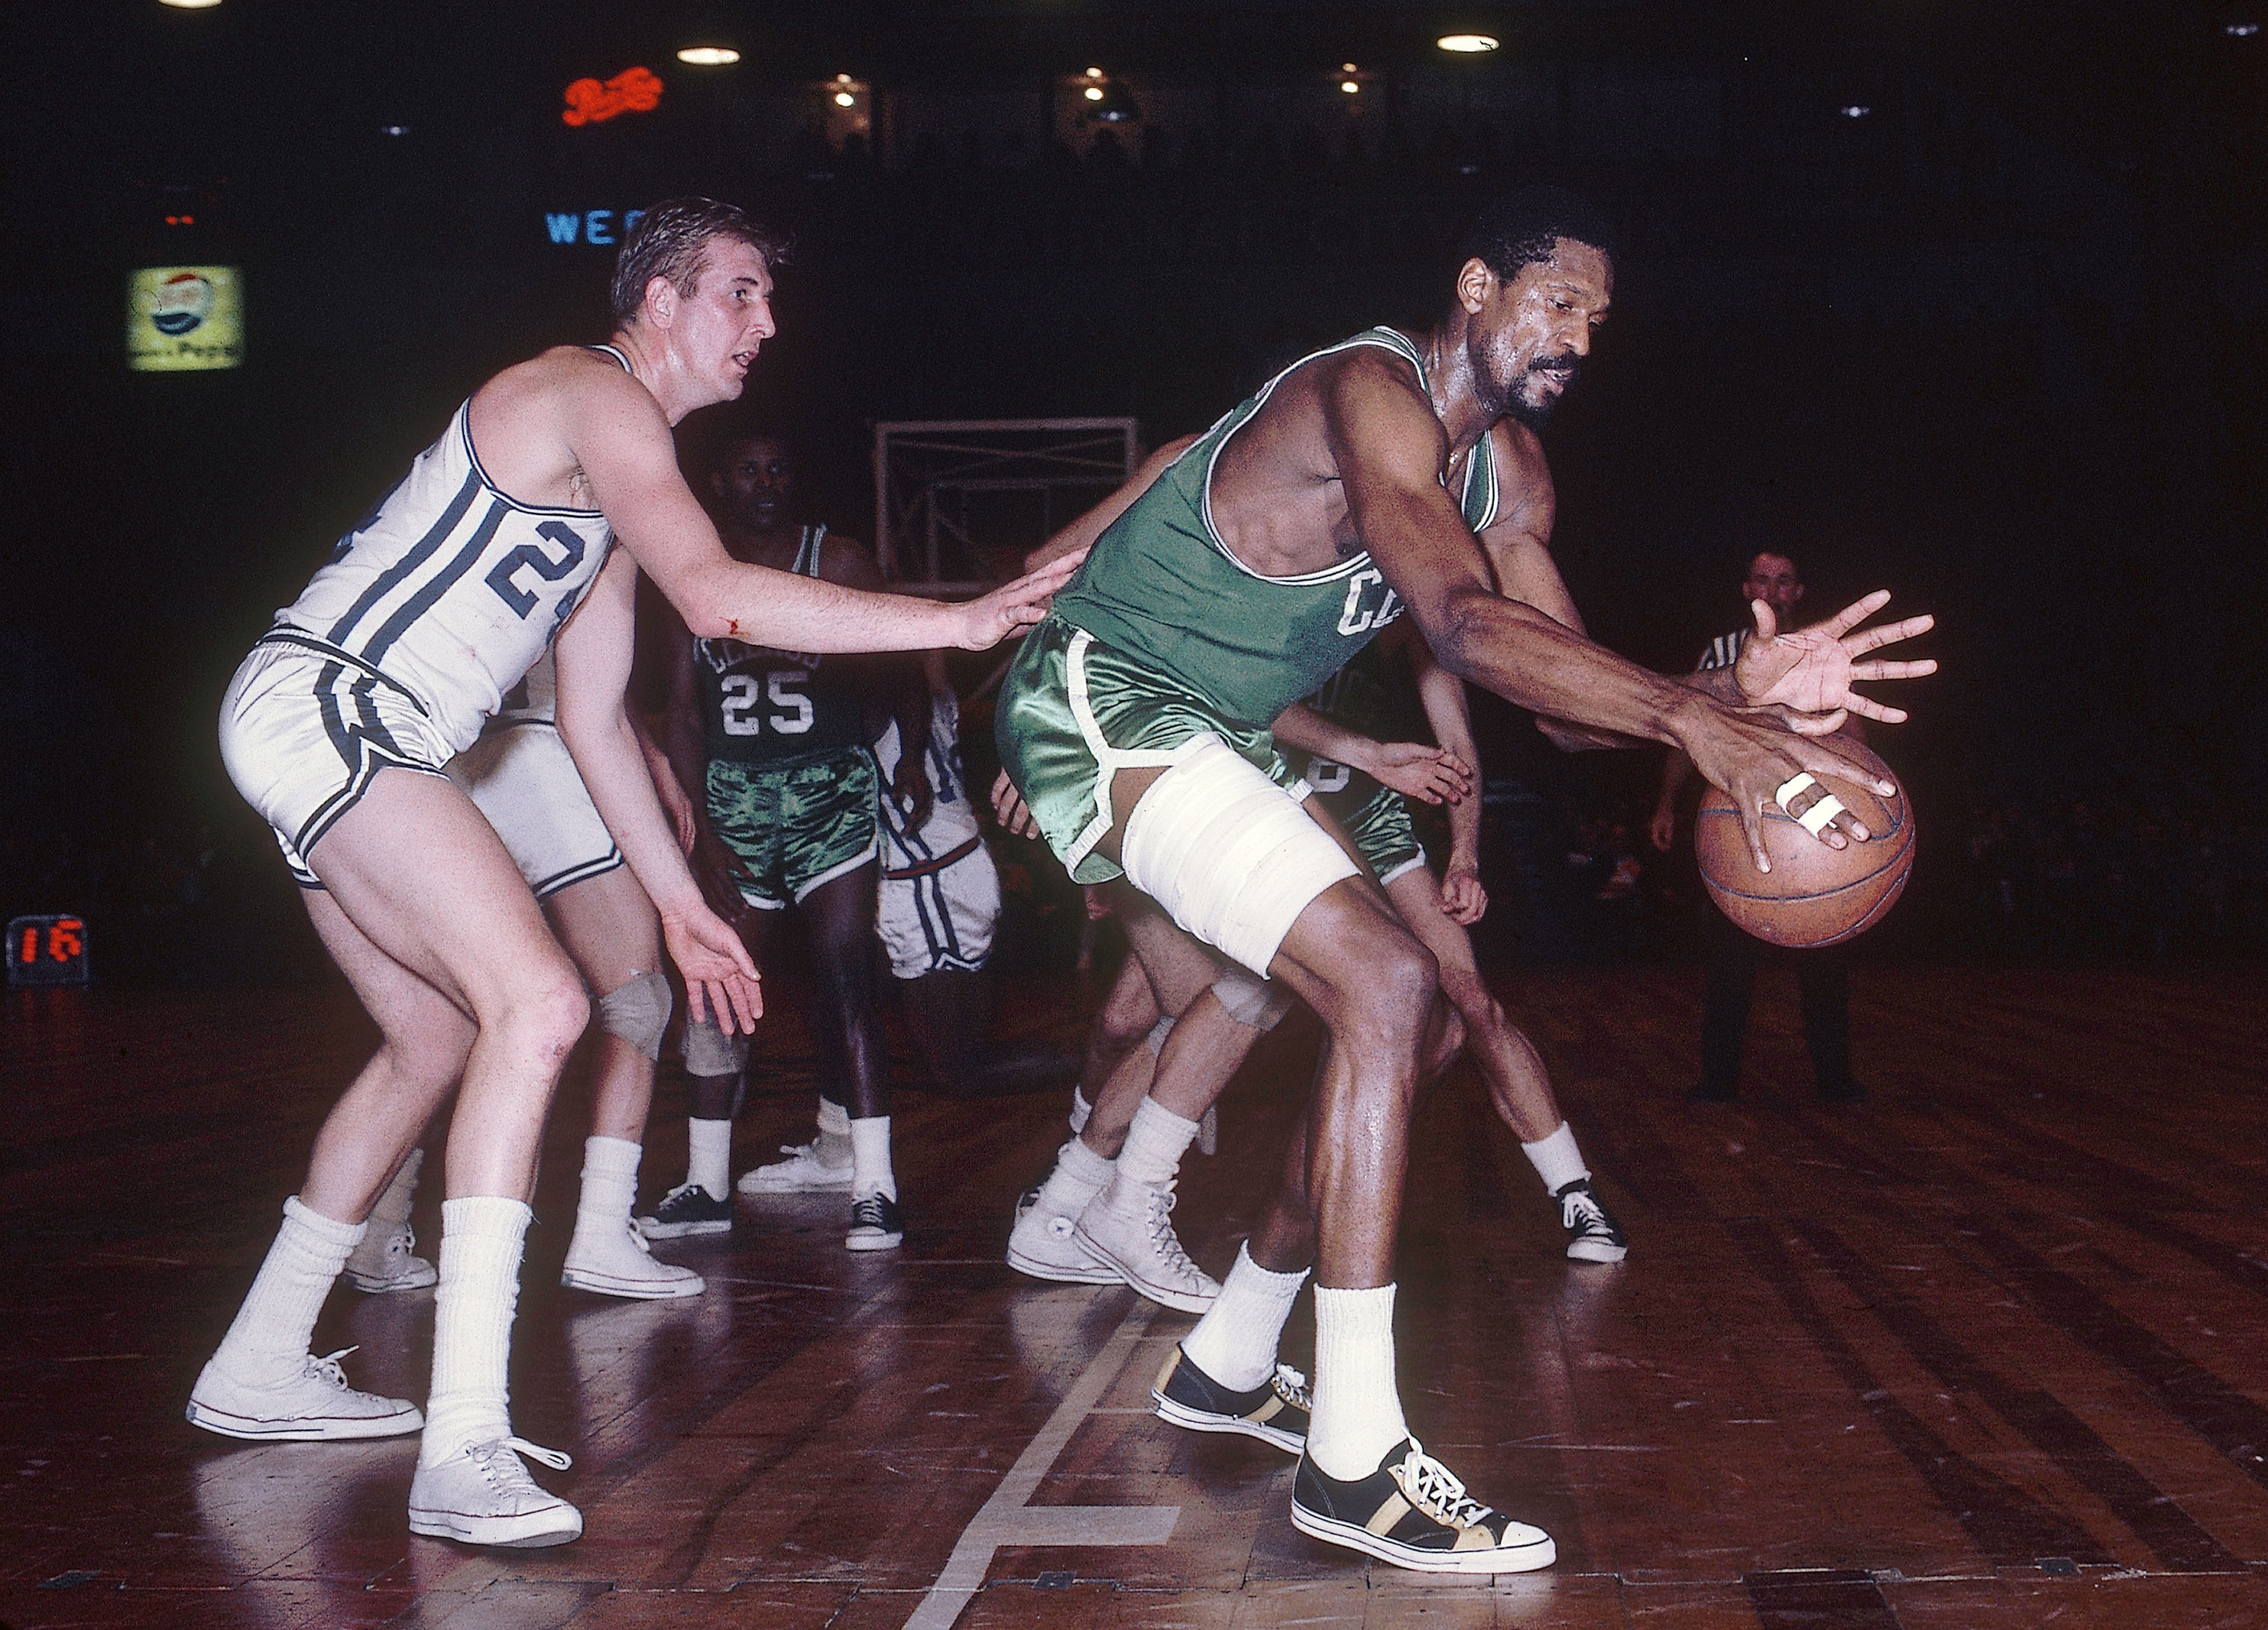 The All-Time Rebound Leader For Every NBA Team: Bill Russell Leads